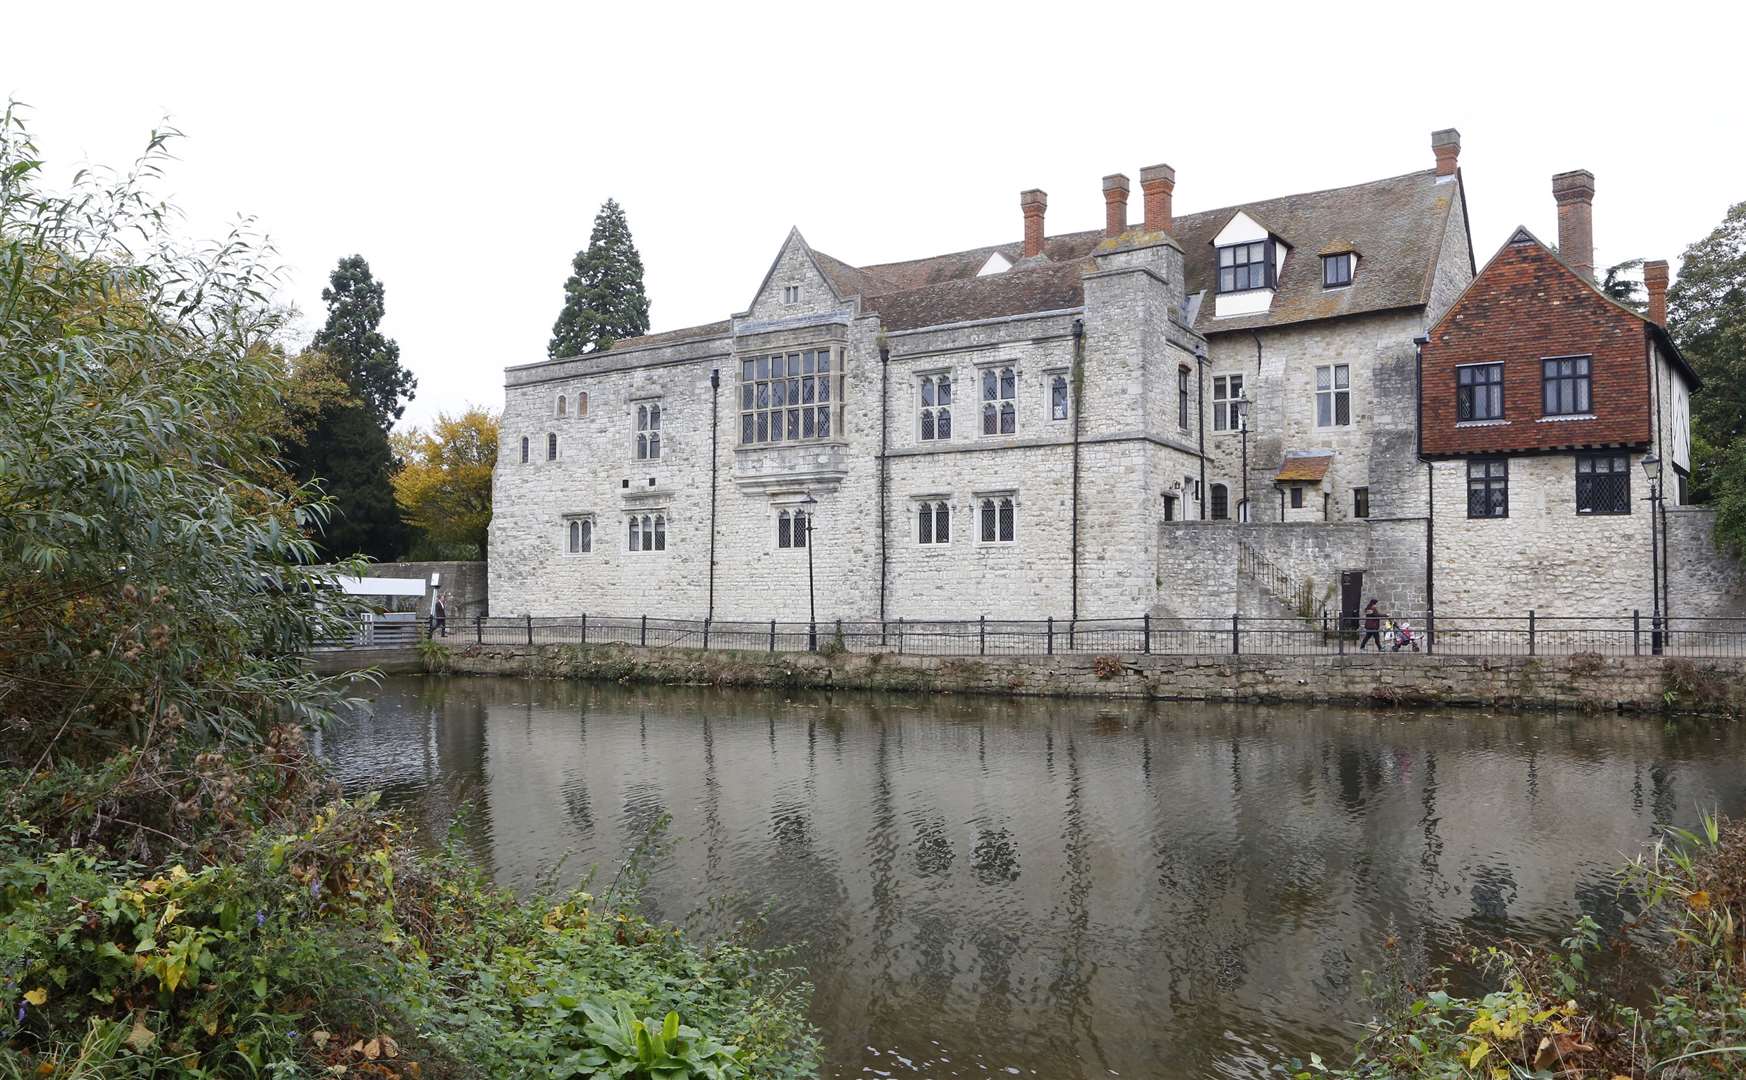 The Archbishop's Palace sits on the banks of the River Medway in Maidstone town centre. Picture: Andy Jones